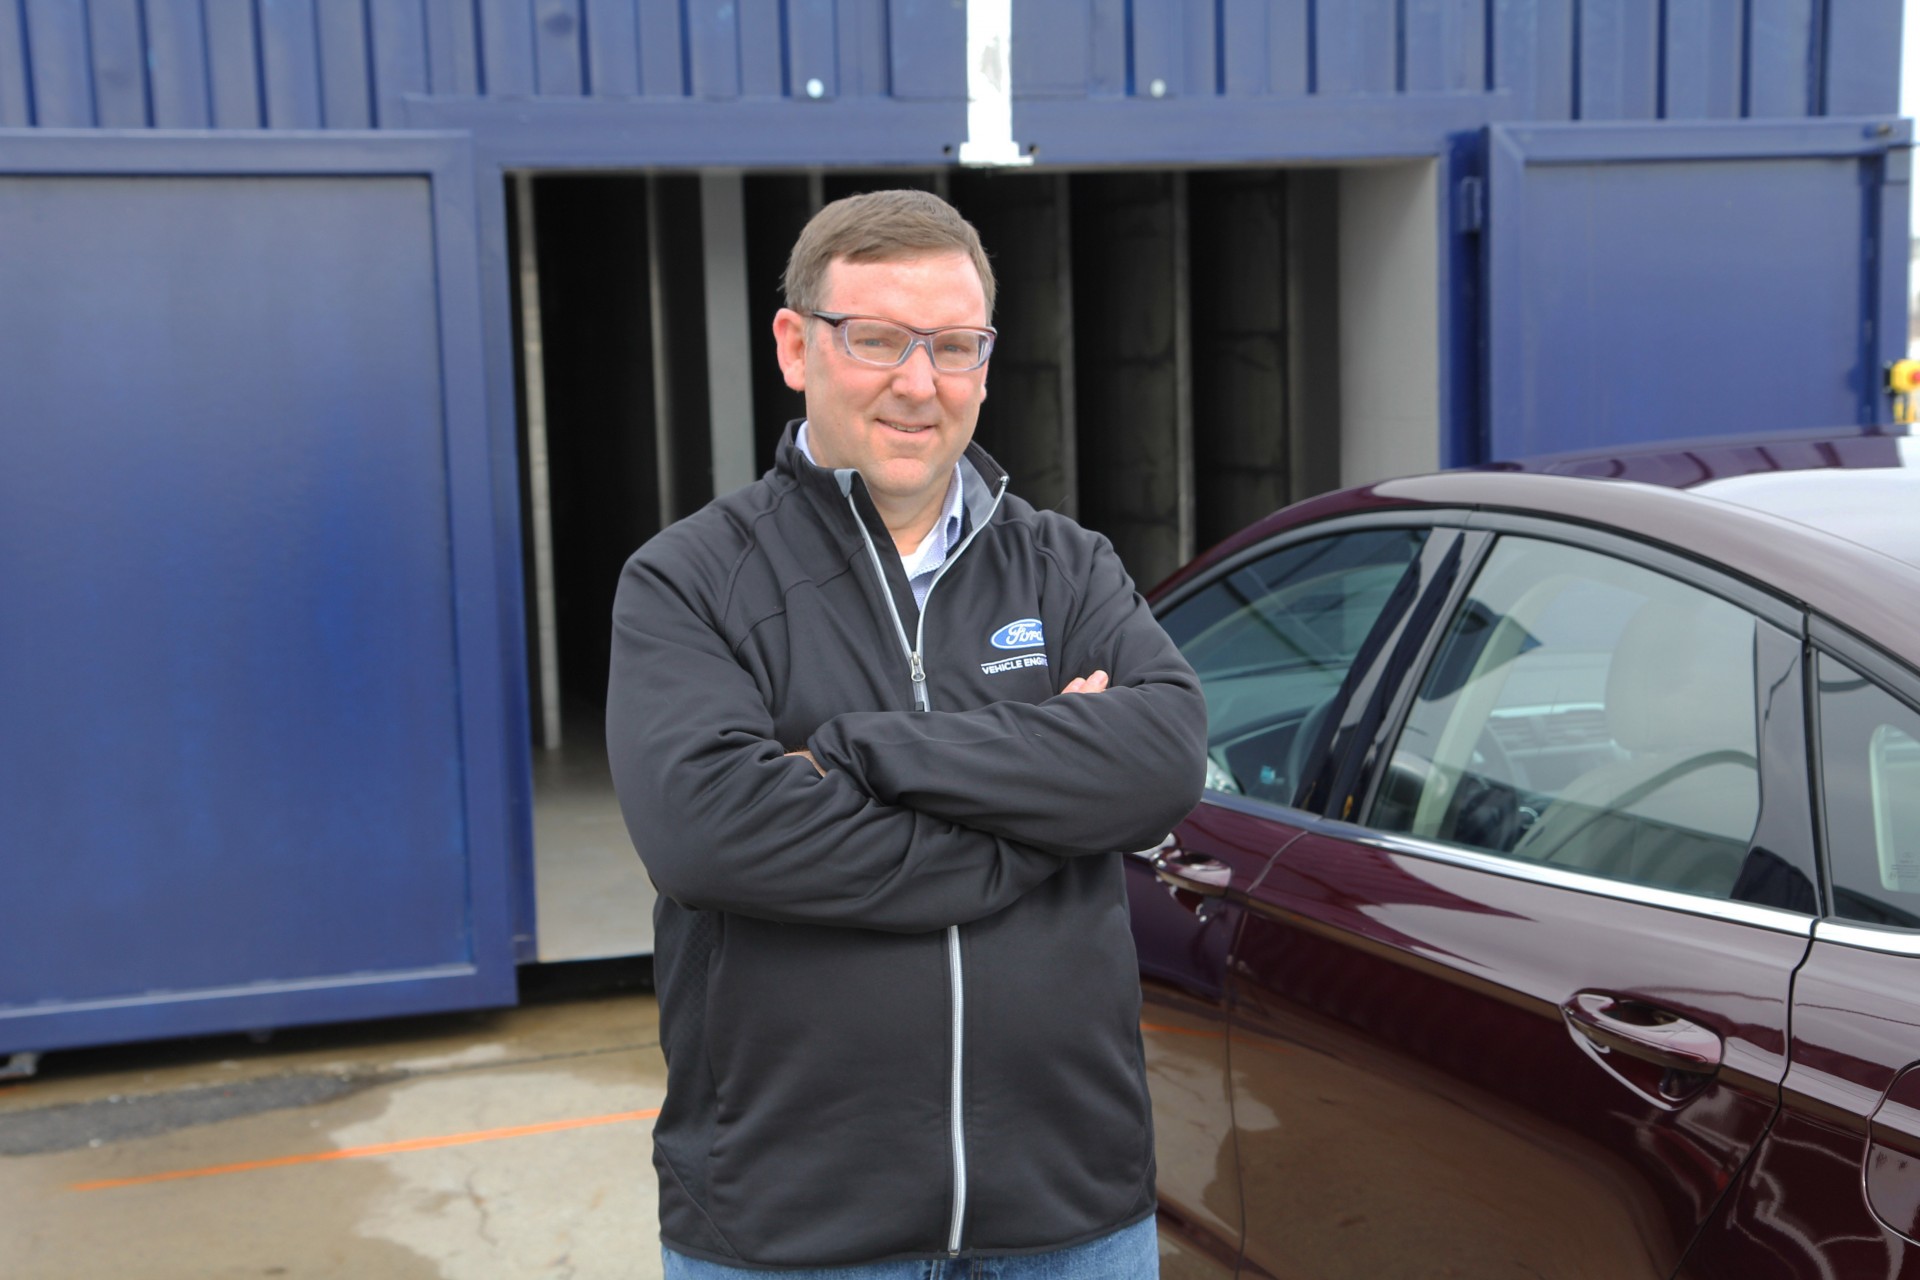 Bill Gulker - Ford wind noise supervisor and technical specialist